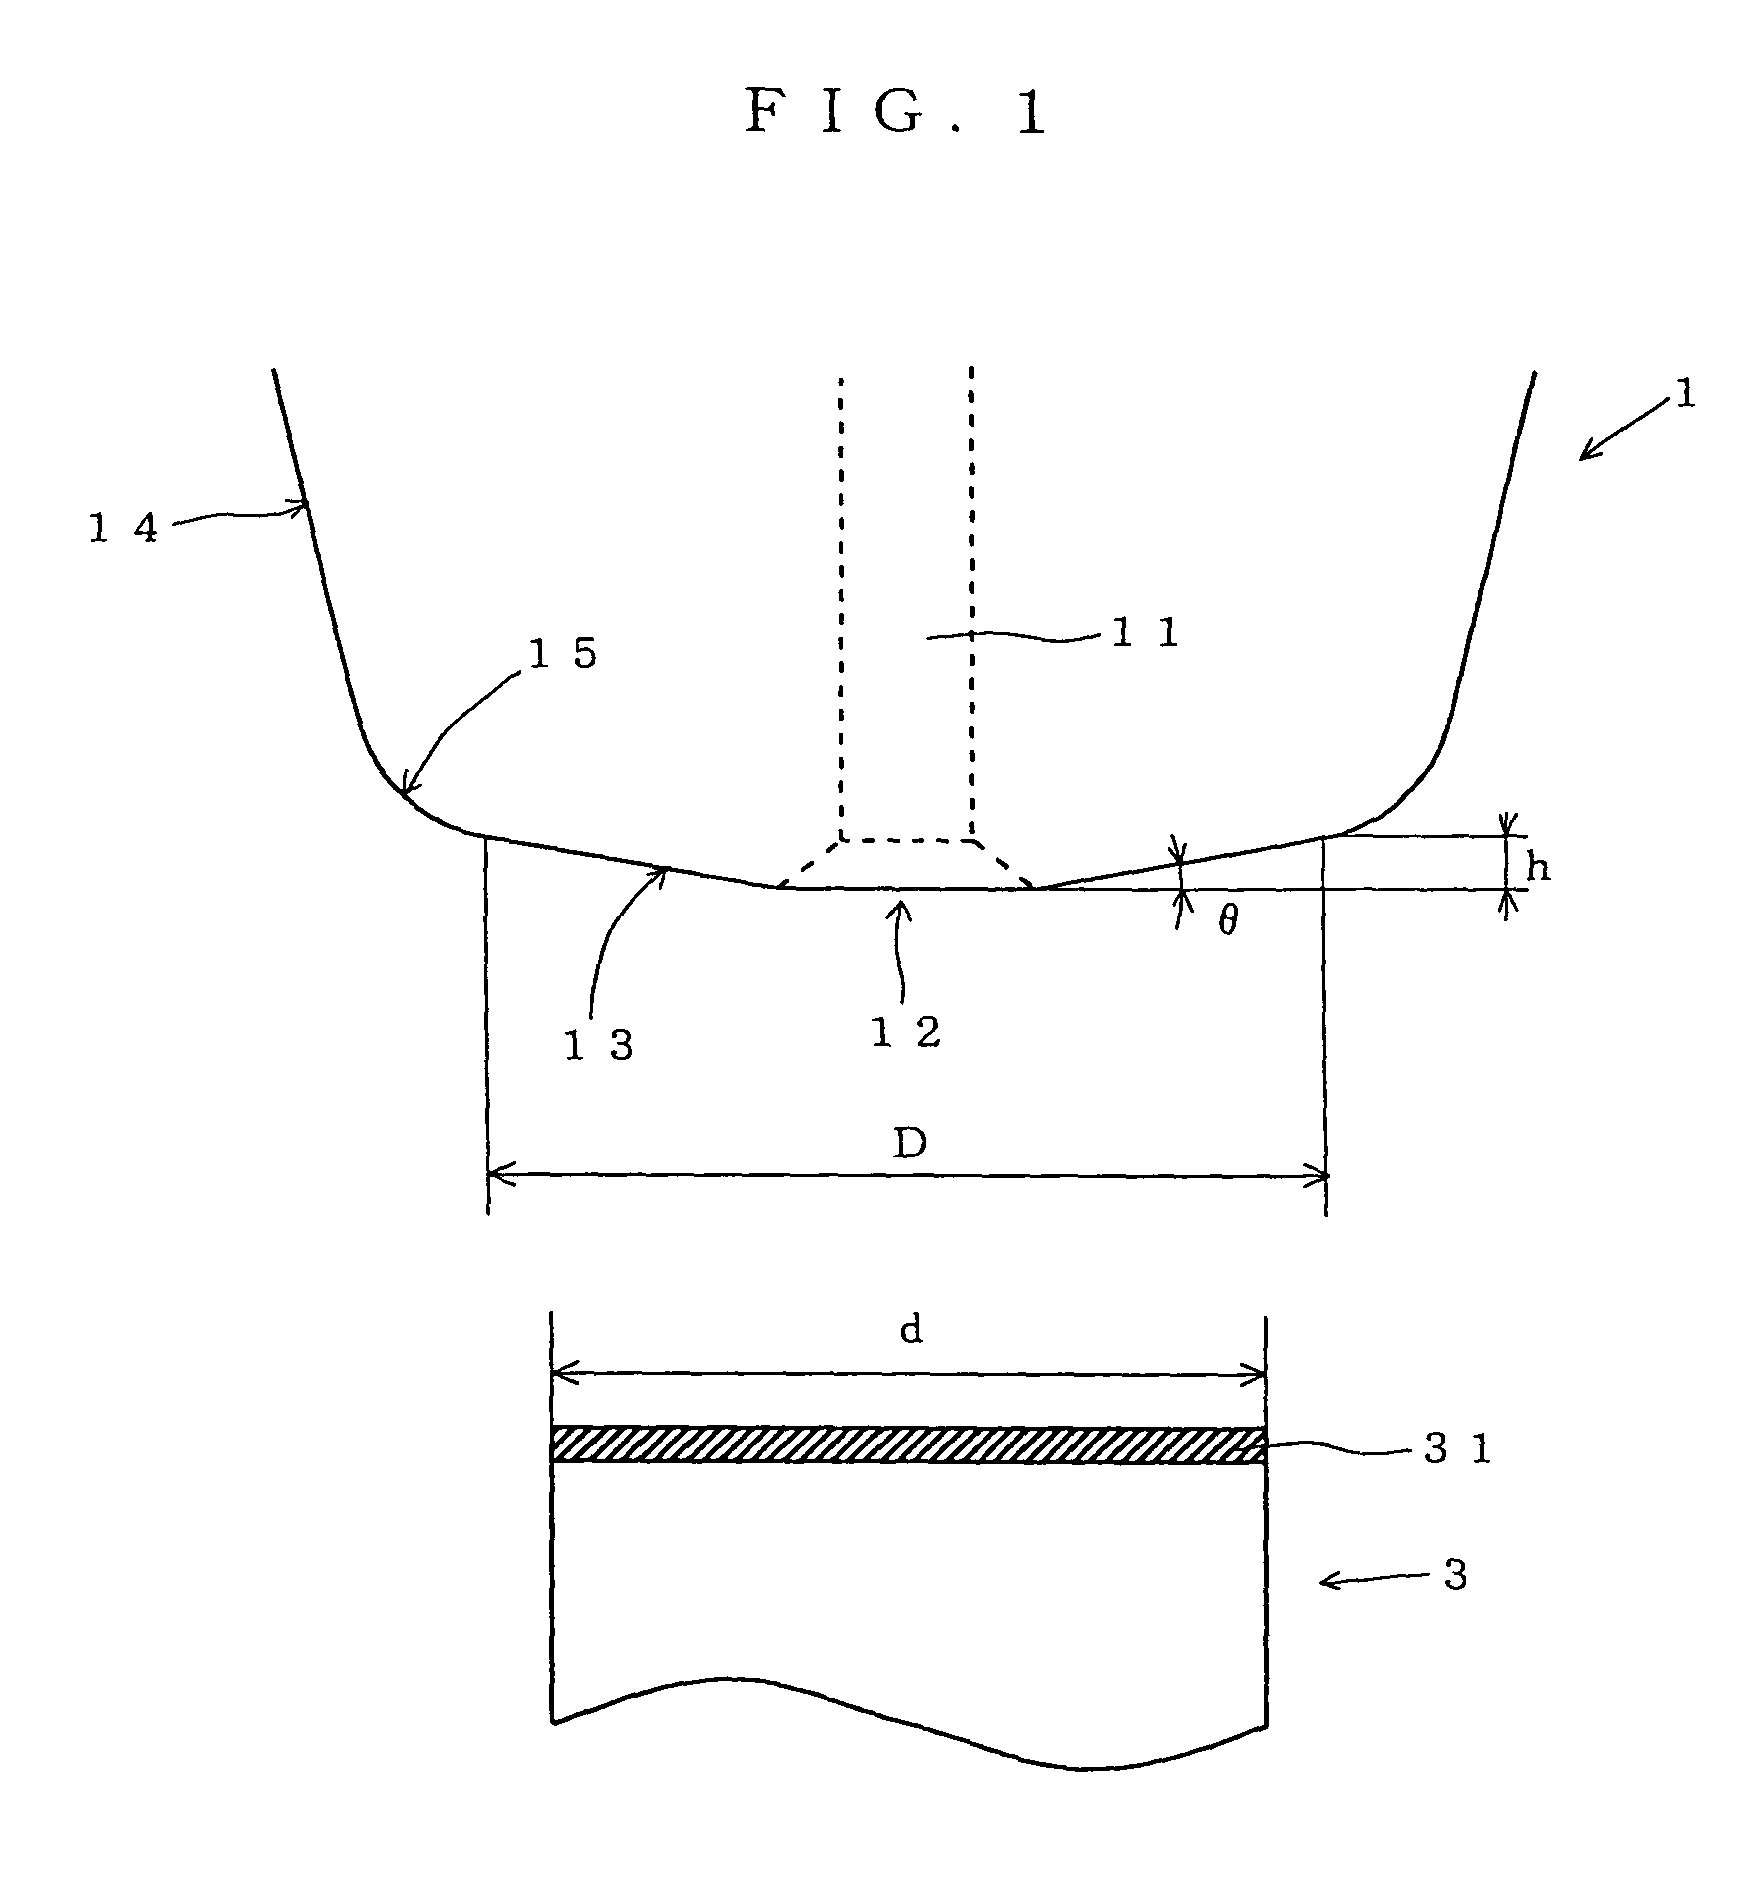 Capillary for wire bonding and method of wire bonding using it